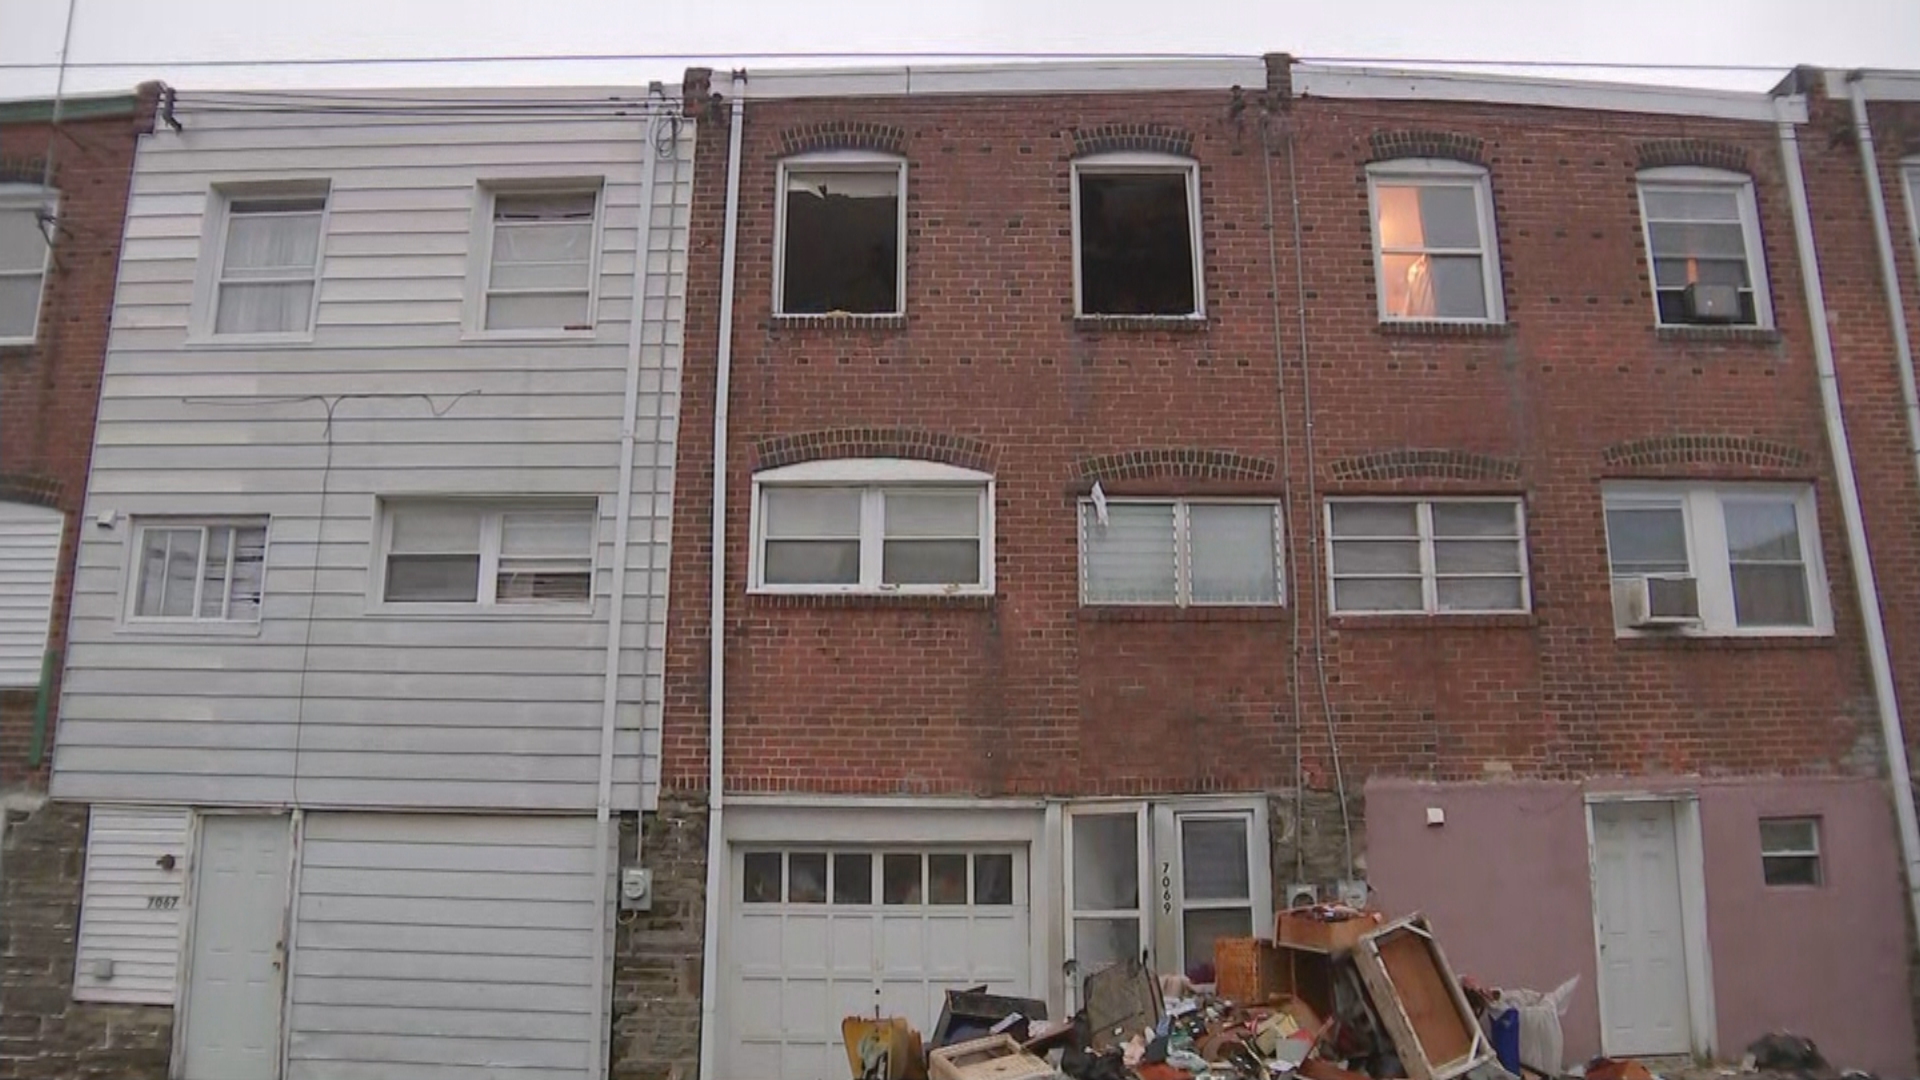 Overnight Upper Darby House Fire Leaves Man Dead, Displaces 4 People: Officials